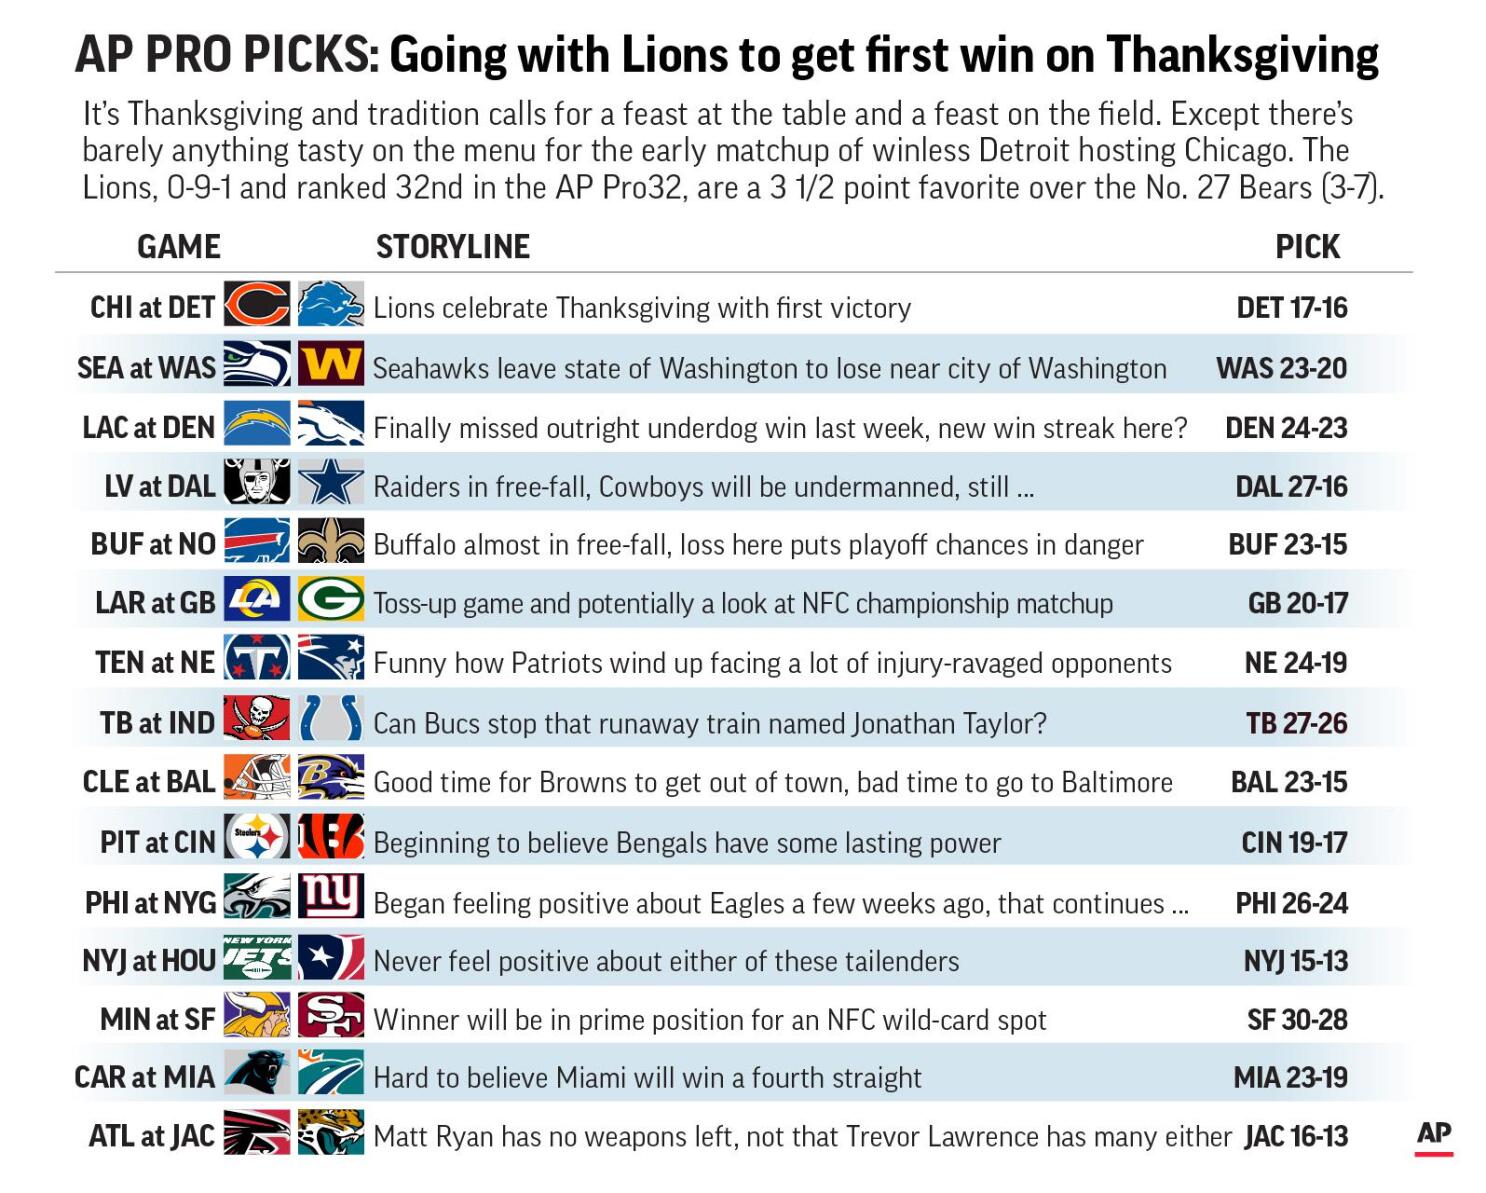 Traditional Thanksgiving Day games are tricky for Pro Picks